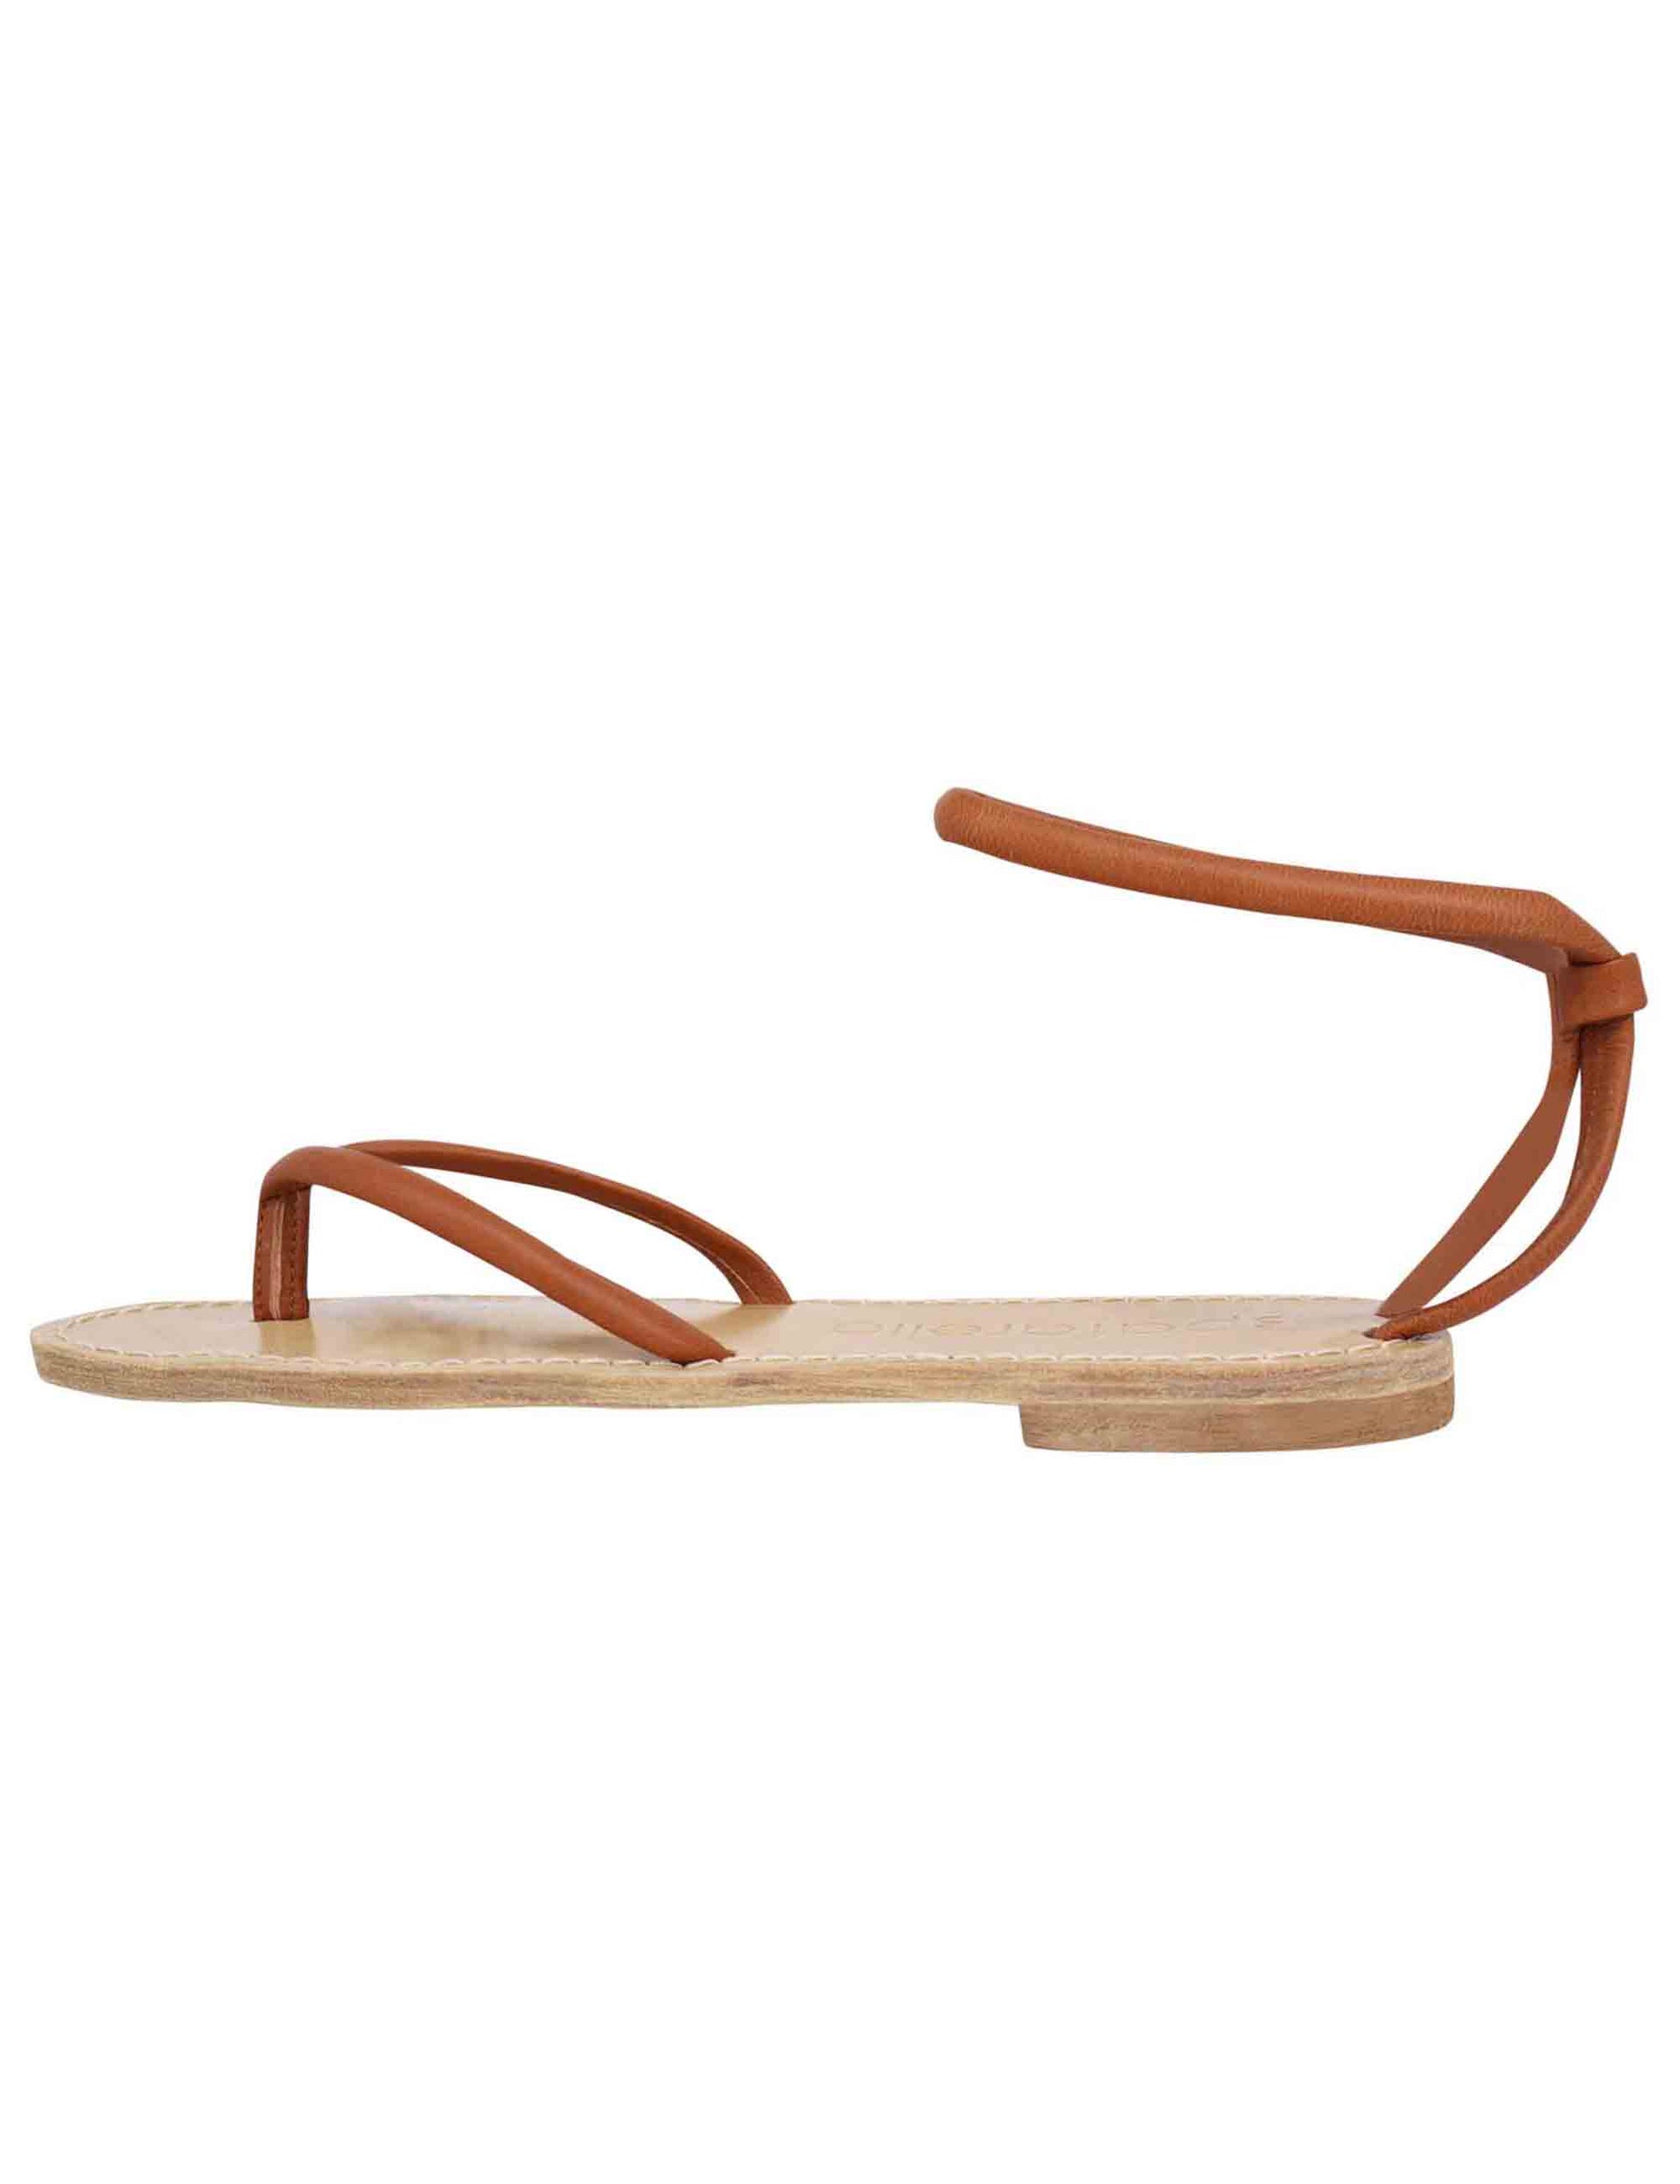 Women's flat flip-flop sandals in tan leather with anklet